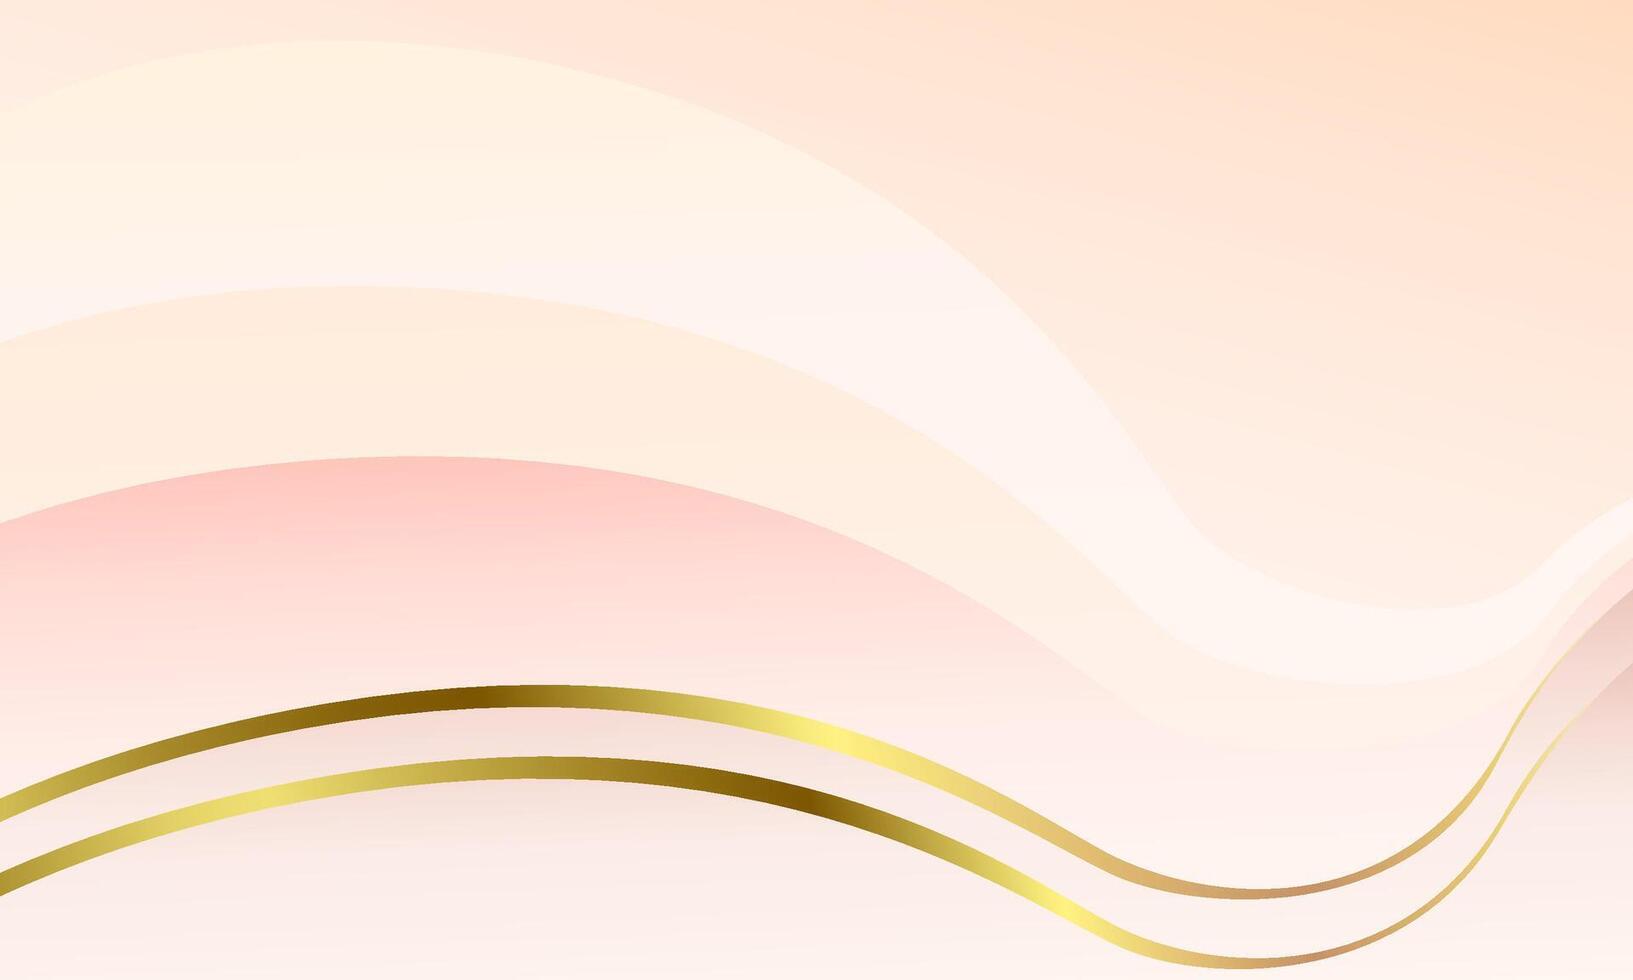 Abstract background with golden lines and waves. Vector illustration for your design.